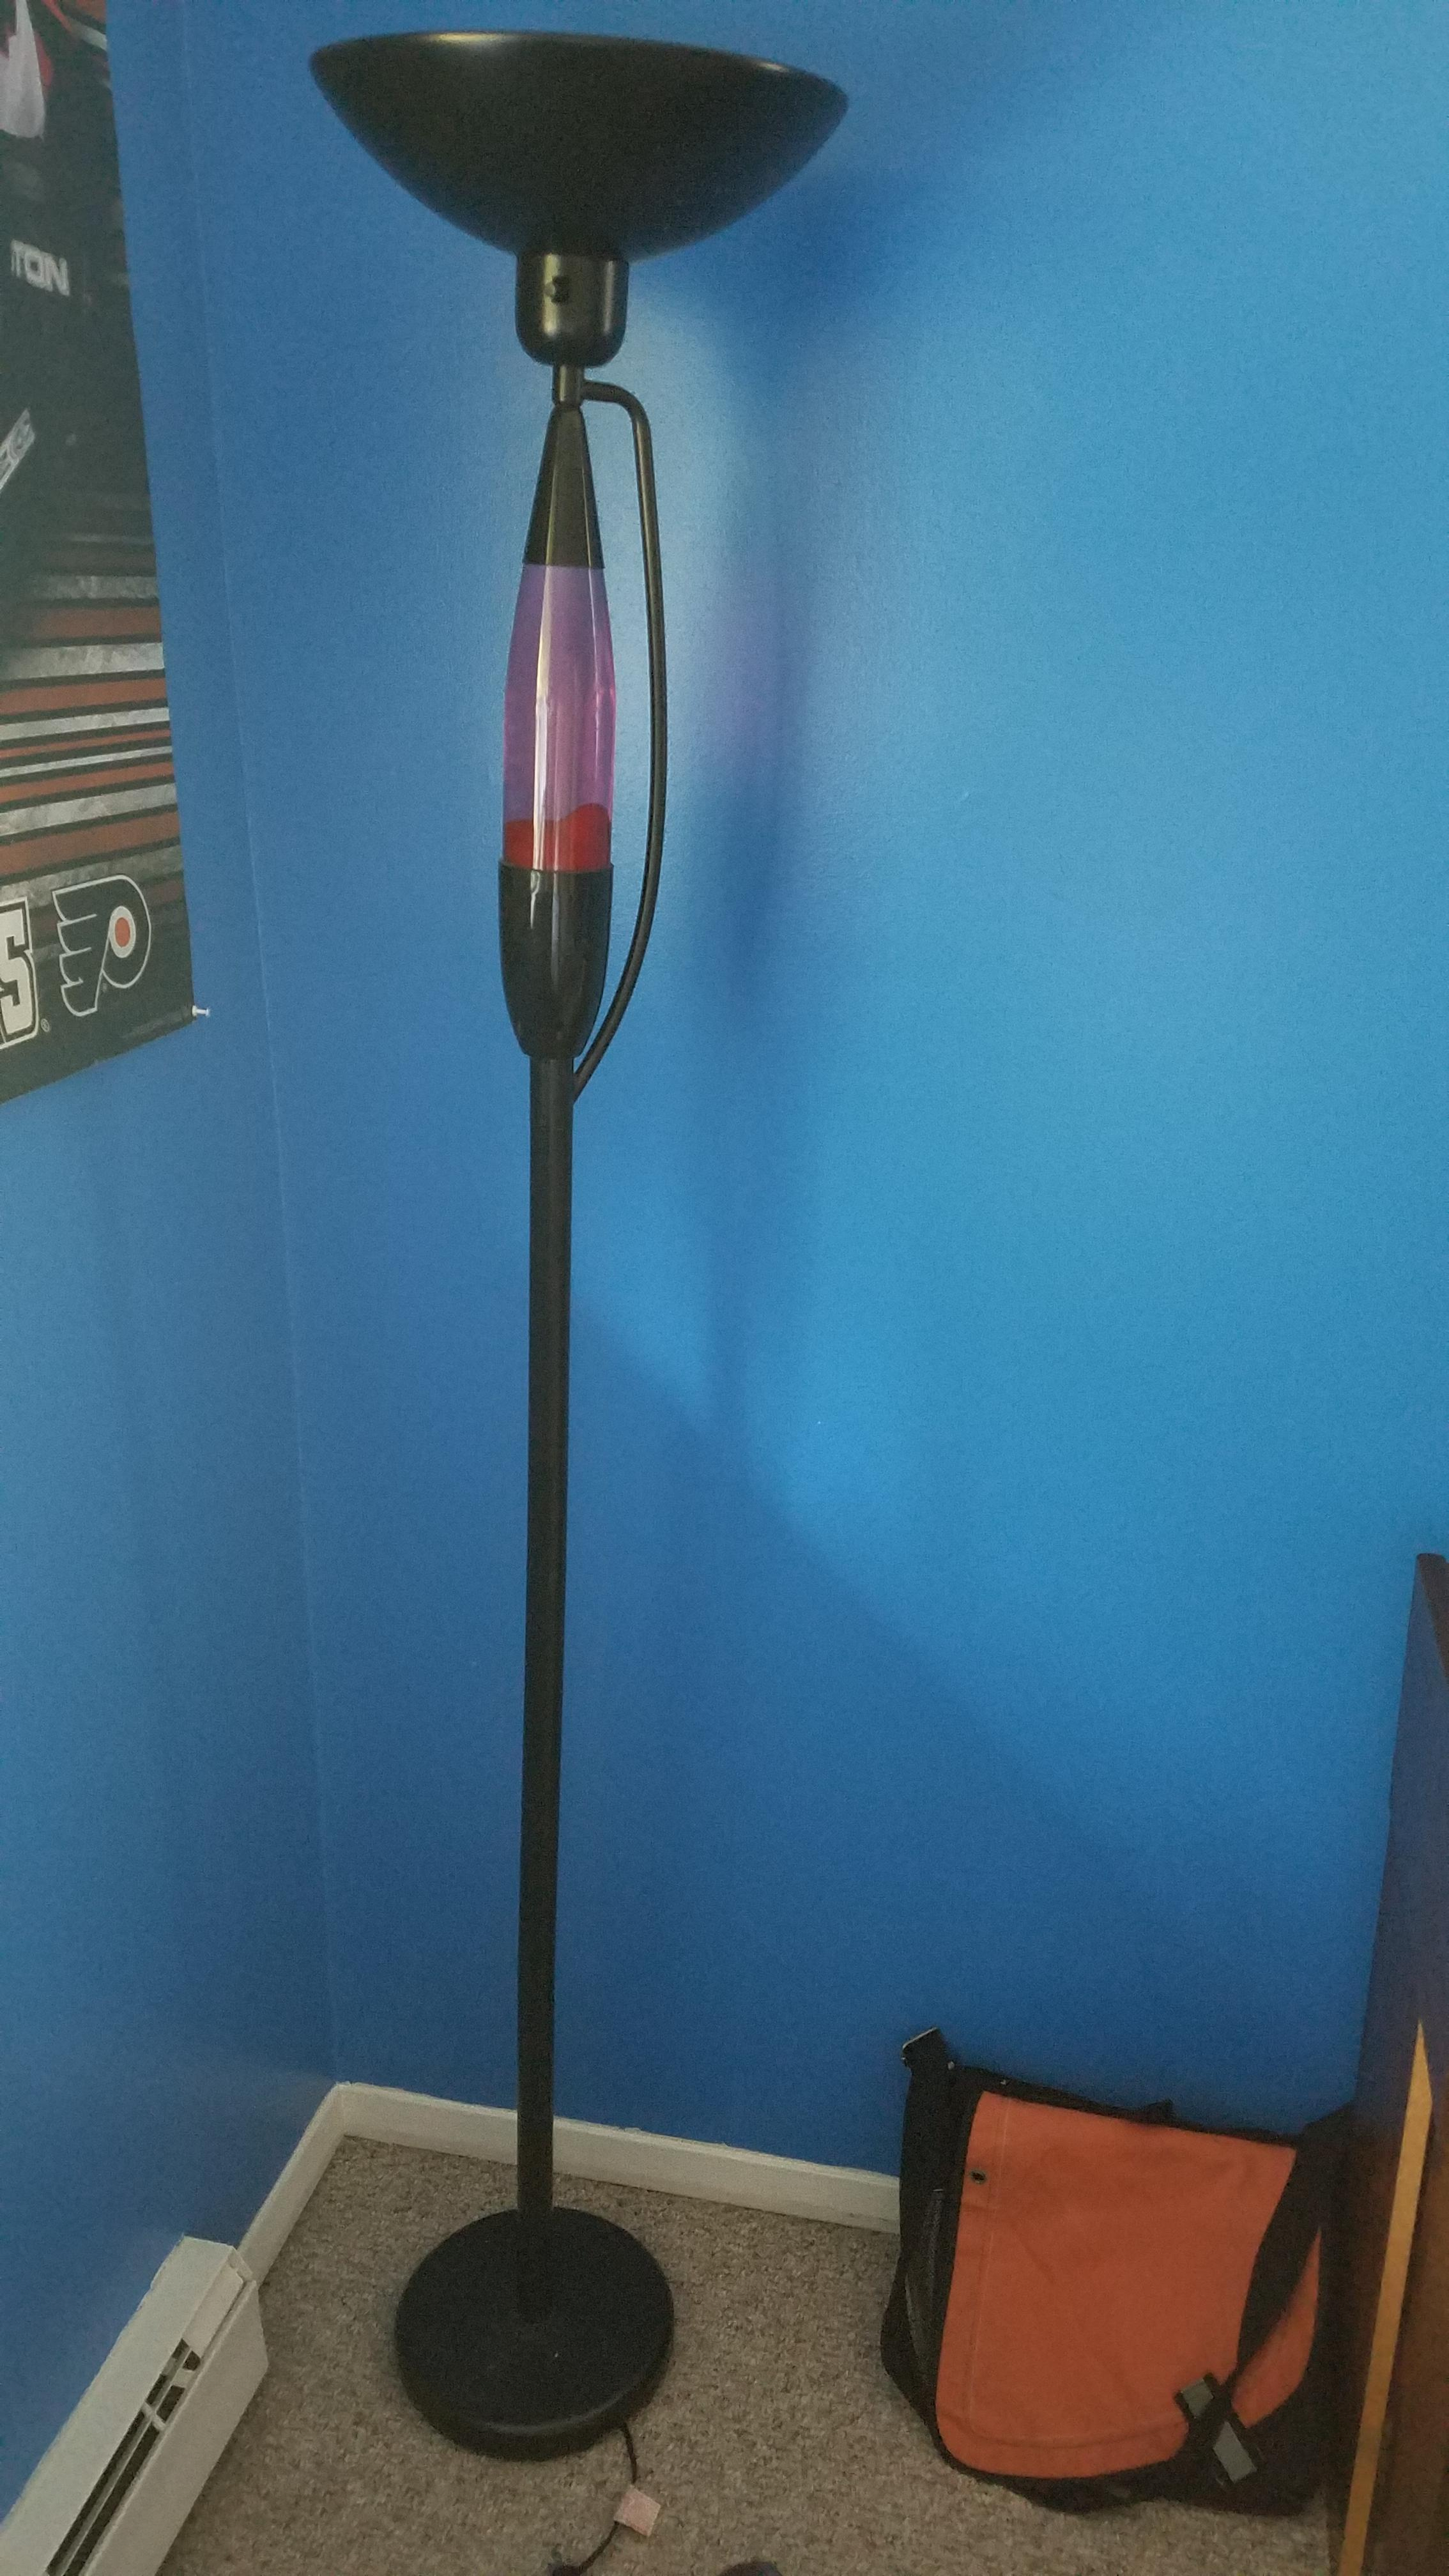 Hmf This Floor Lamp With A Lava Lamp Built In Helpmefind within sizing 2268 X 4032